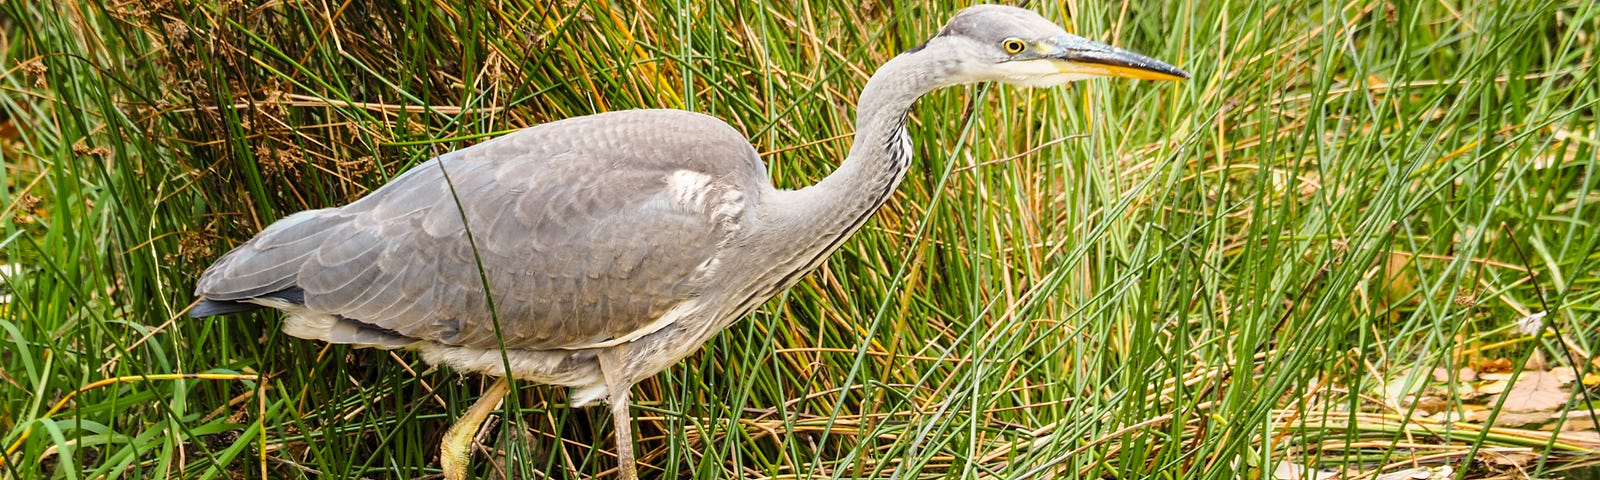 Grey Heron striding beside a riverbank clothed in reeds and marram grass. The water is speckled with autumn leaves.